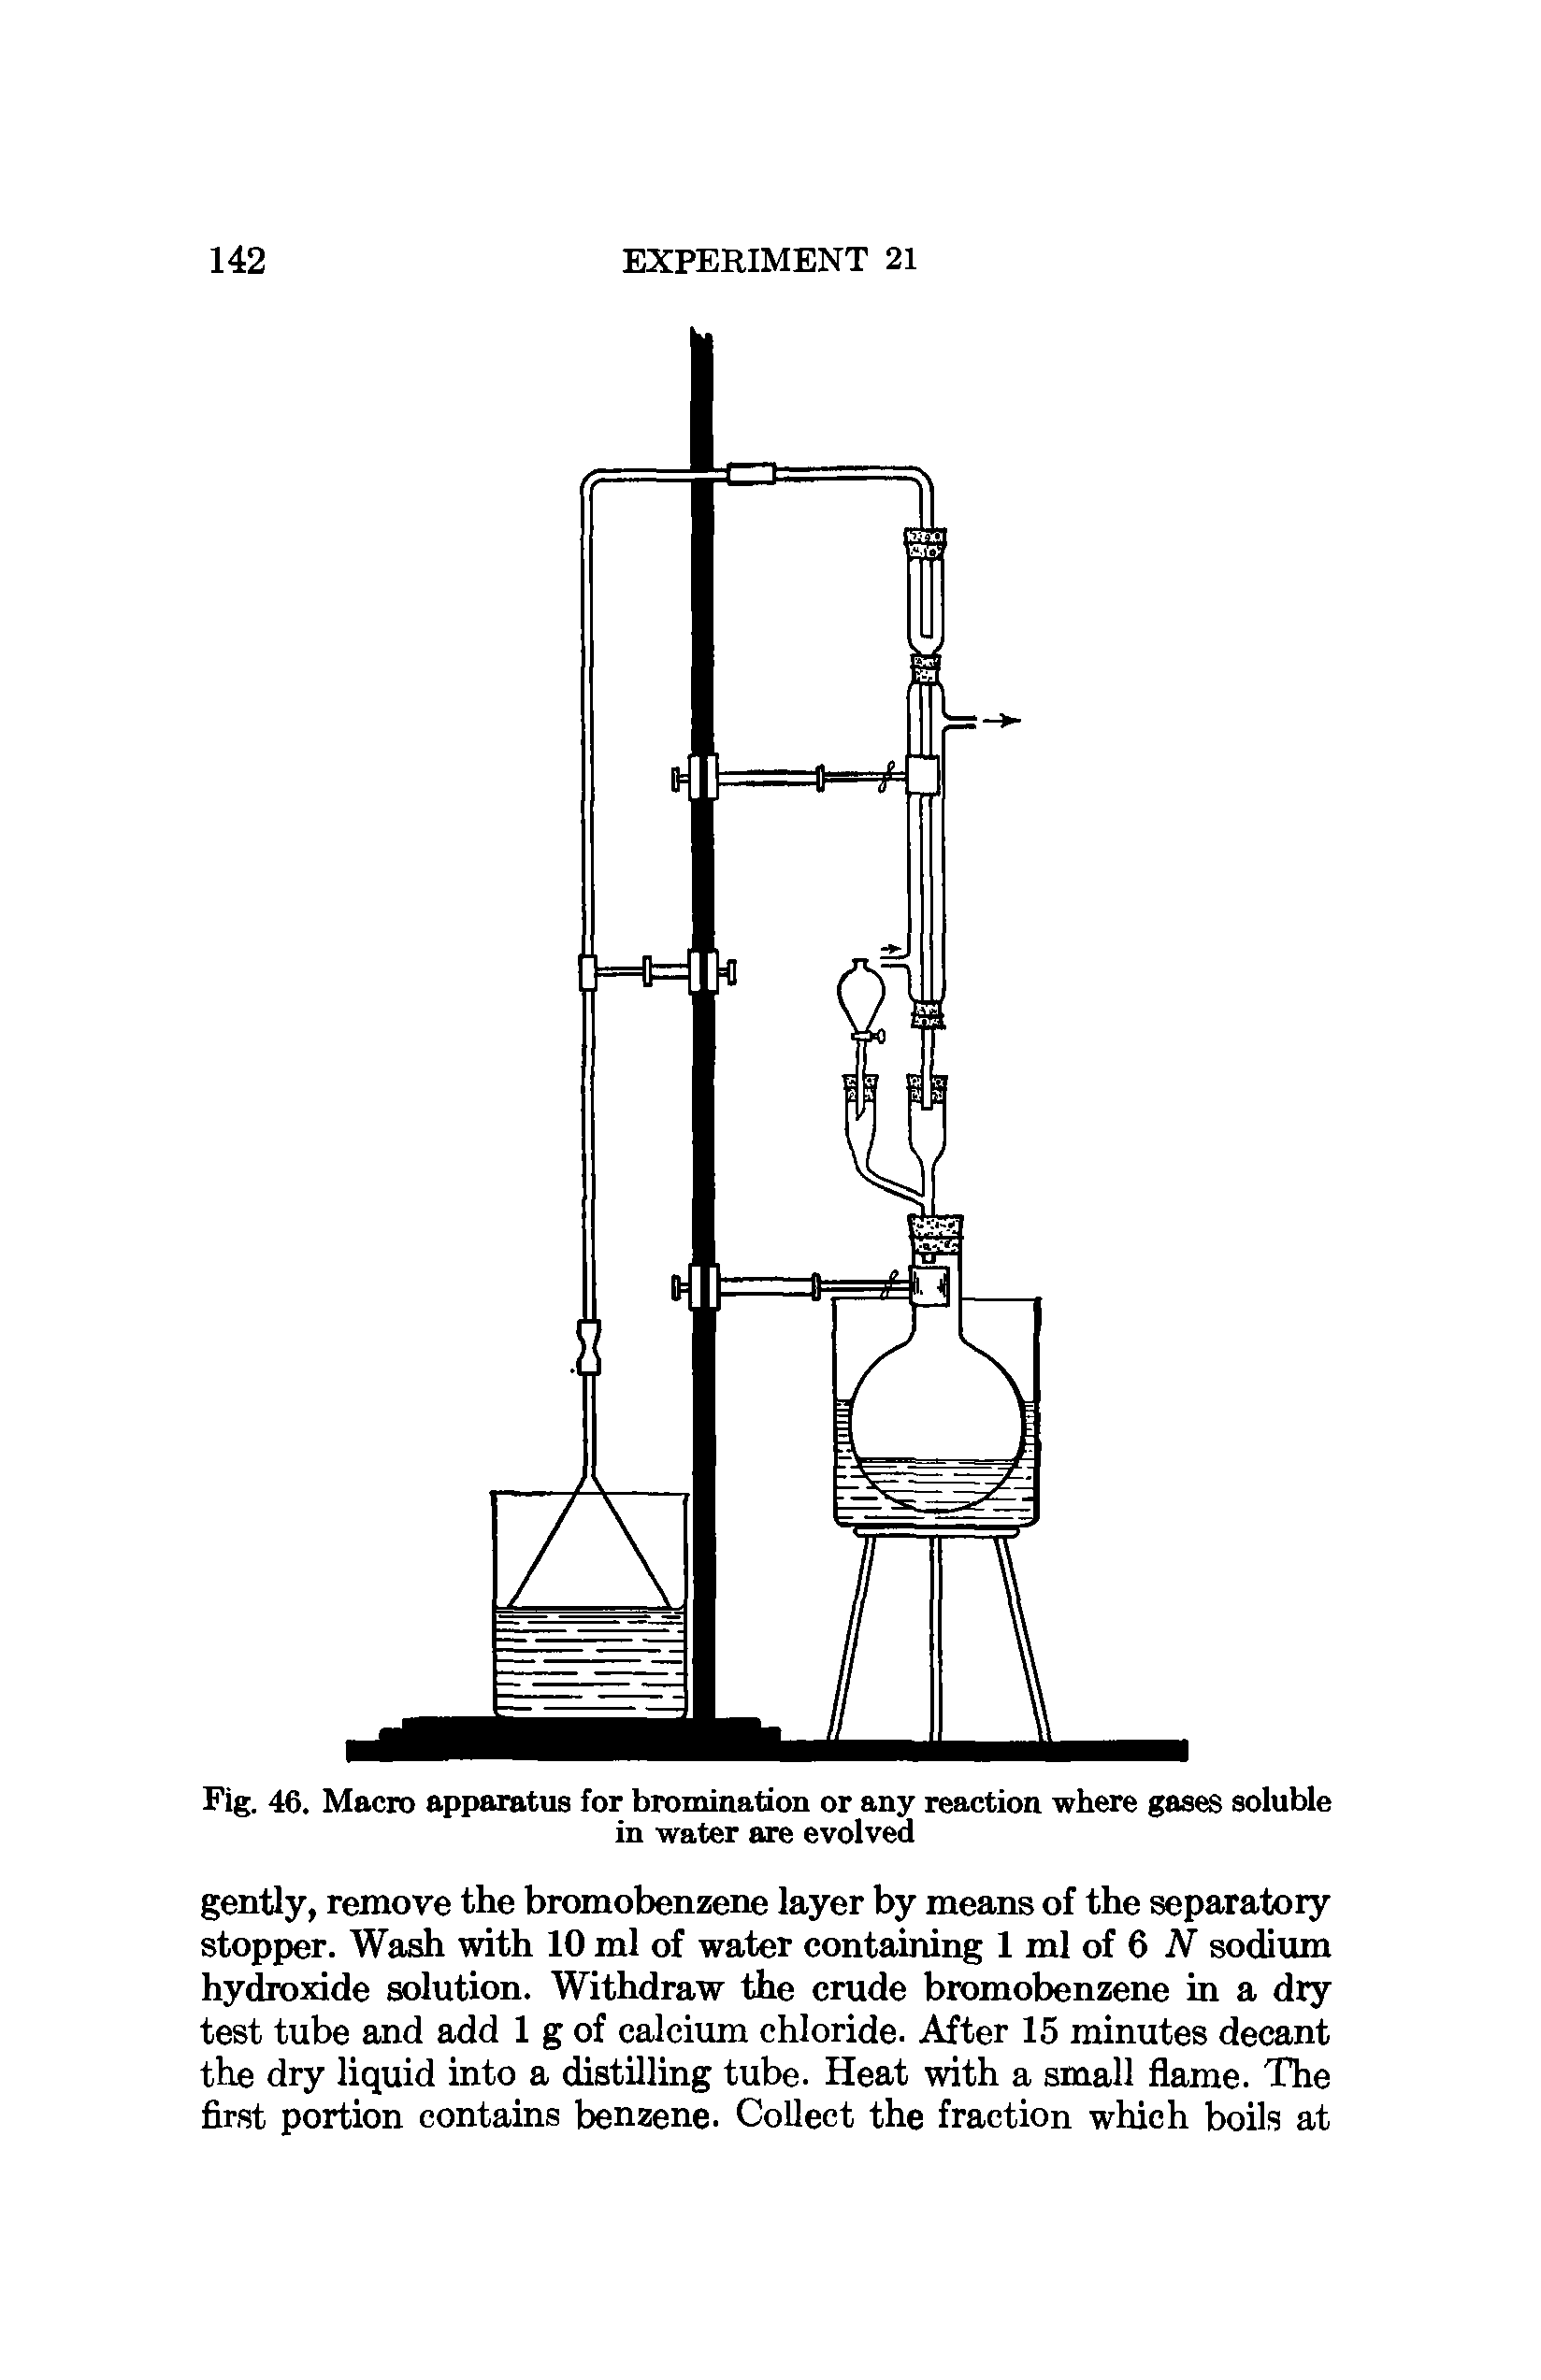 Fig. 46. Macro apparatus for bromination or any reaction where gases soluble in water are evolved...